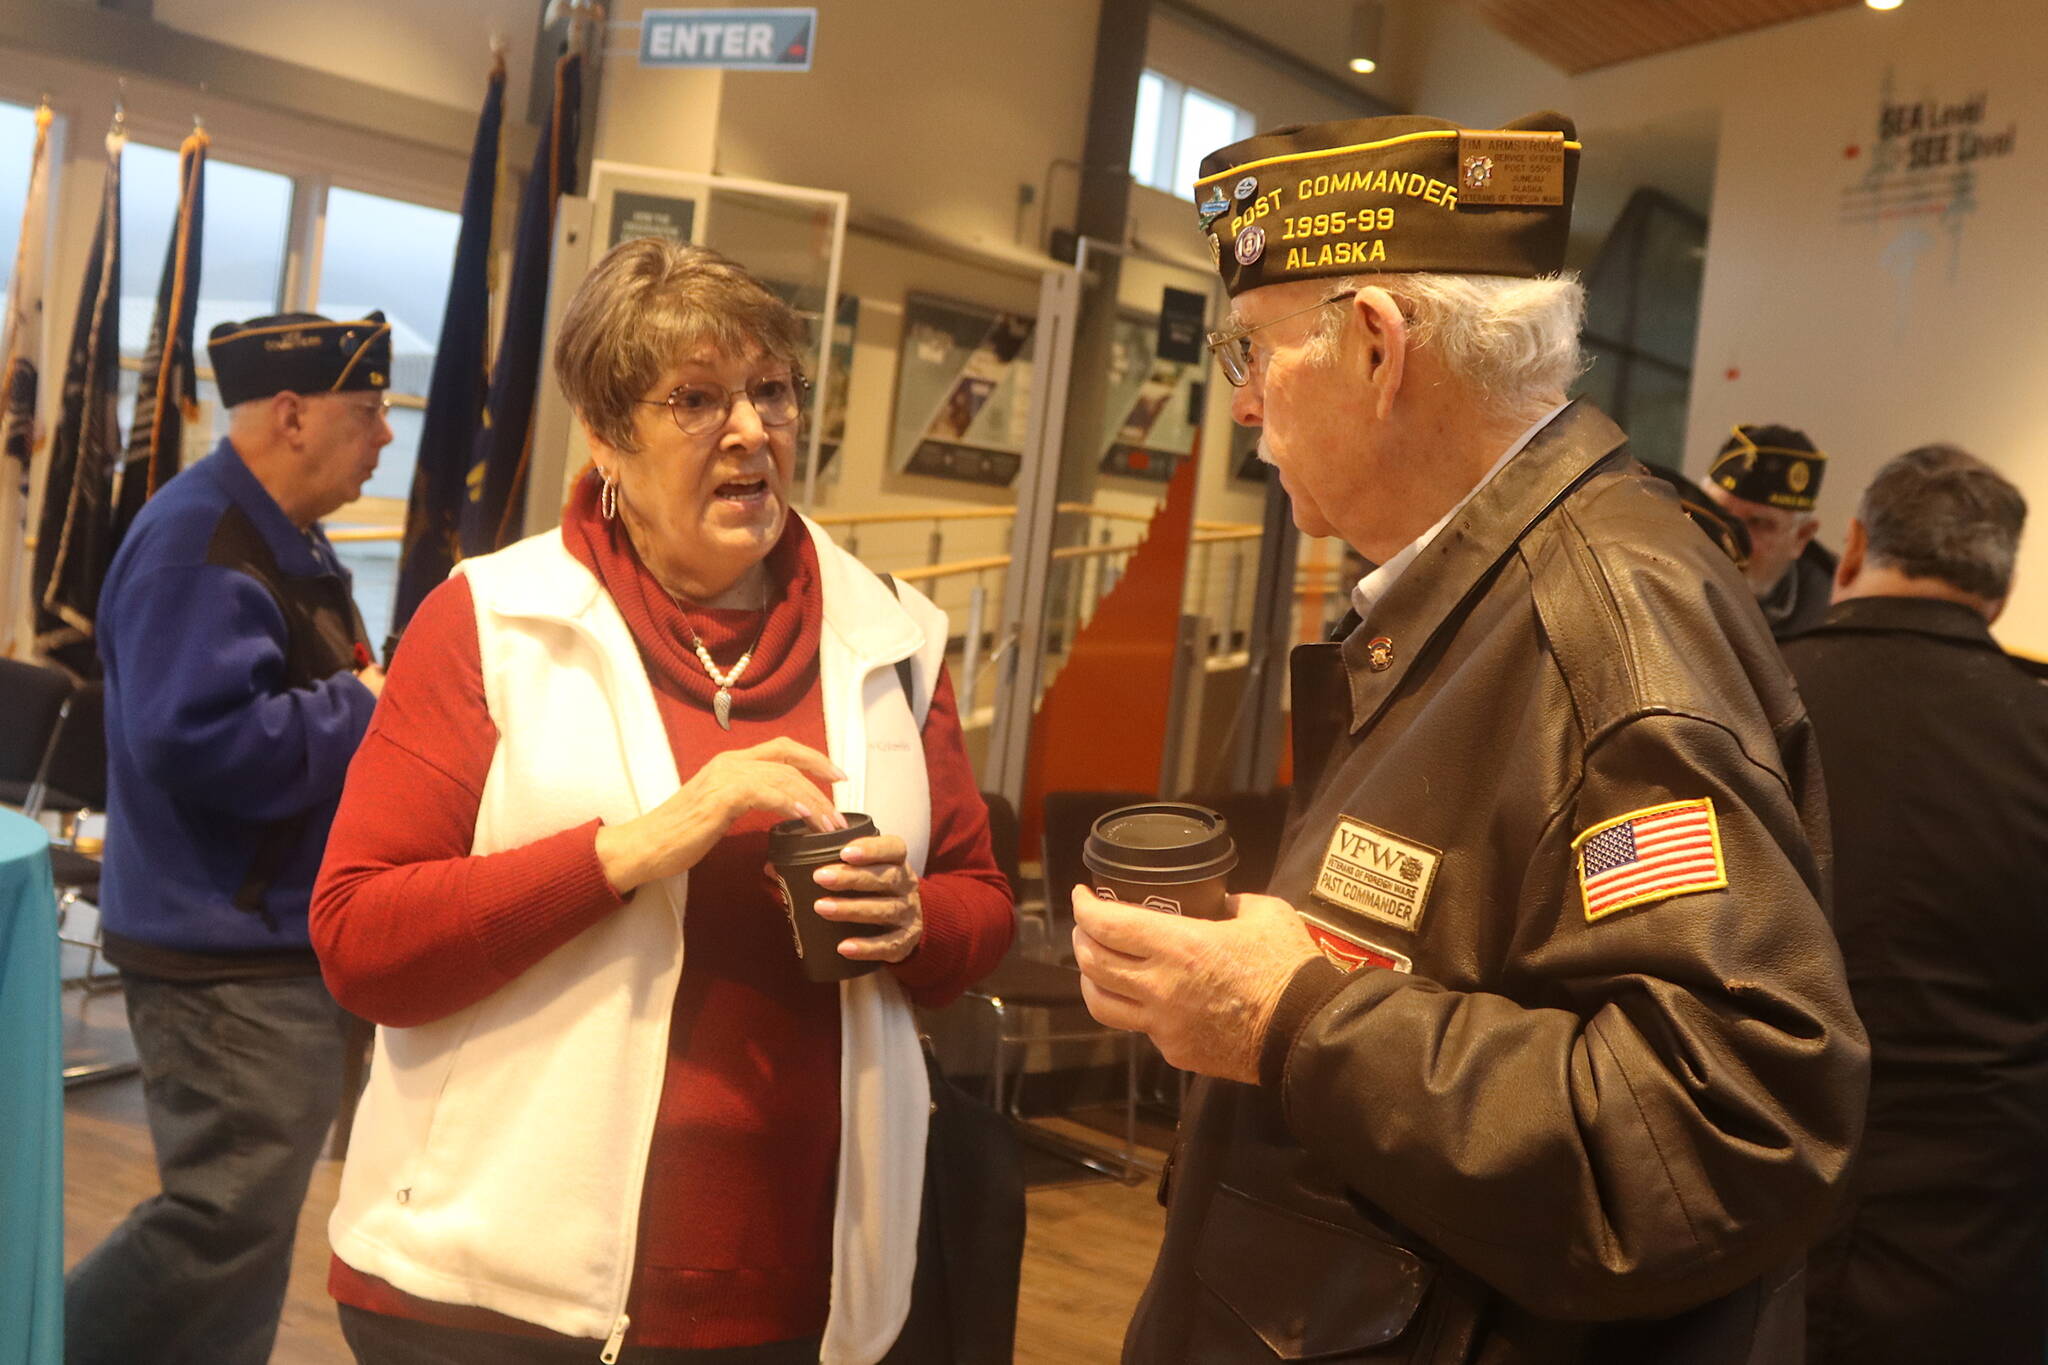 Donna Hurley and Tim Armstrong discuss the sinking of the USS Juneau during a reception Sunday at the Mount Roberts Tram terminal following a memorial ceremony commemorating the 80th anniversary of the vessel’s sinking. Both longtime Juneau residents are among those who’ve met some or all of the 10 survivors of the 697 soldiers aboard the ship. Hurley, who met survivors during a trip to the ship’s construction site in New Jersey, also made a string of remembrance beads with one pearl for each solider who was killed, plus other beads for noteworthy people associated with the ship. Armstrong introduced surviving members who served as grand marshals of the local Fourth of July parade in 1987. (Mark Sabbatini / Juneau Empire)